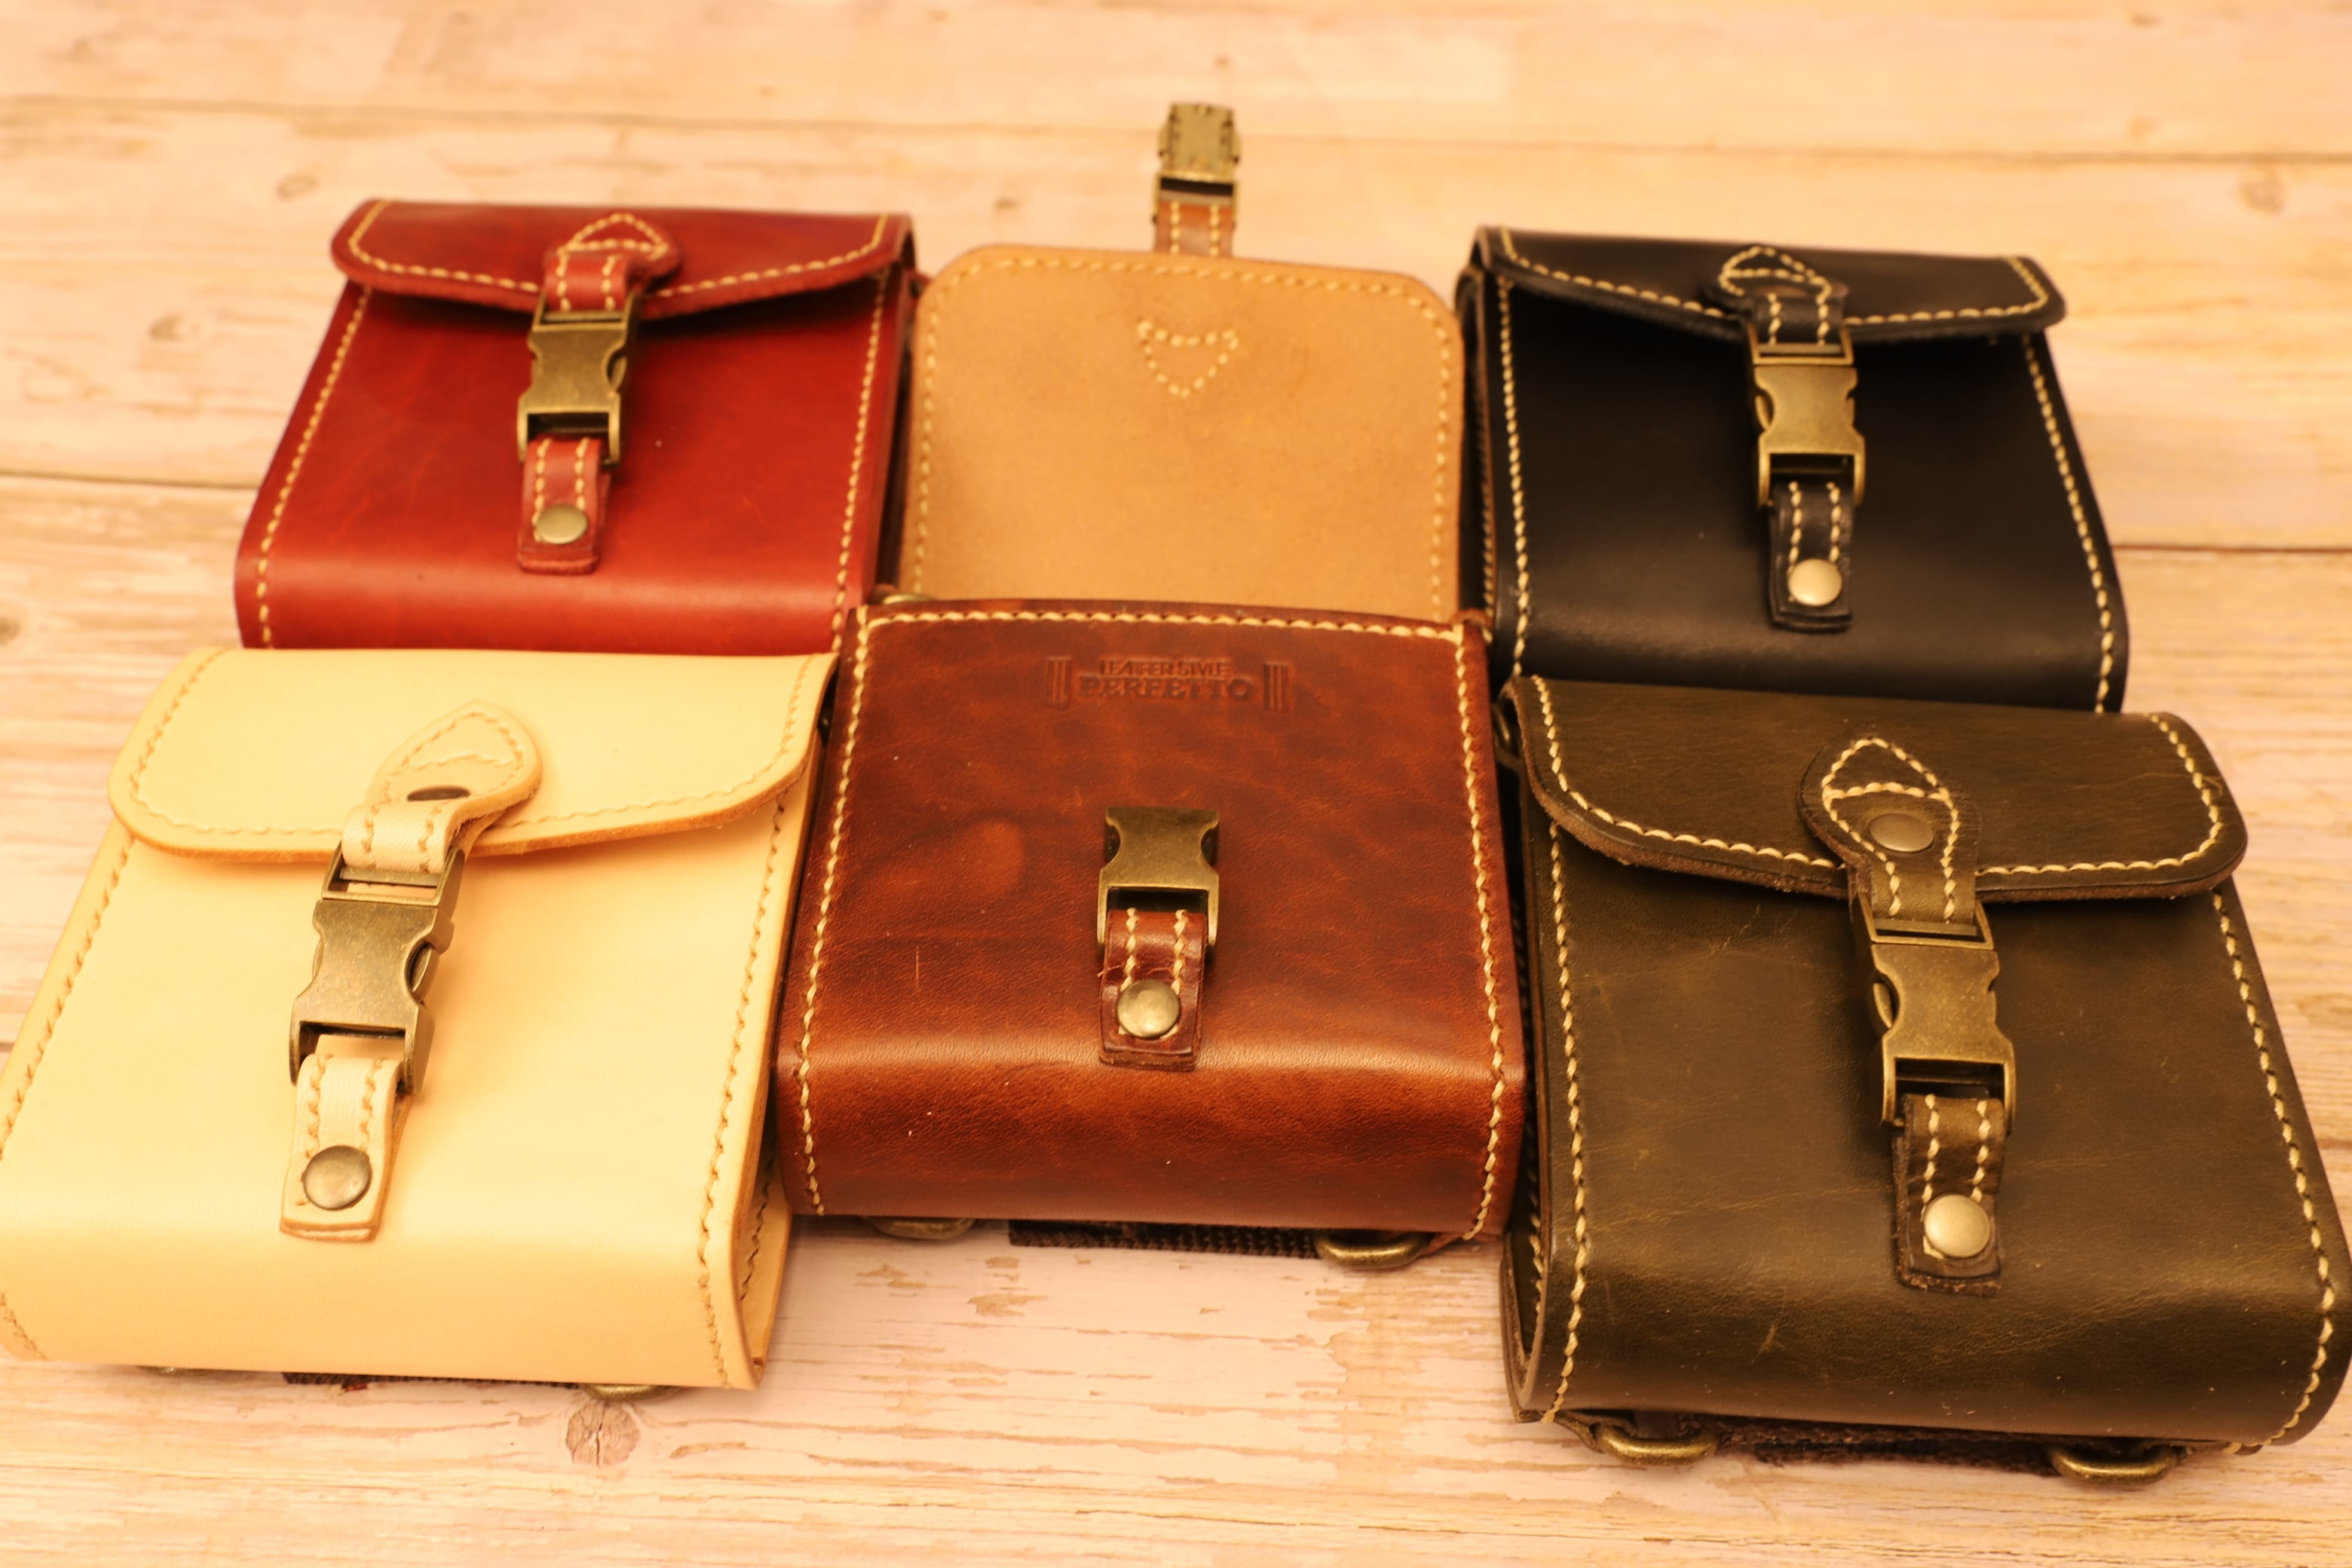 LEATHER STYLE PERFETTO LEATHER LURE CASE for MYRAN 2000 エクスプローラーズ専用モデル